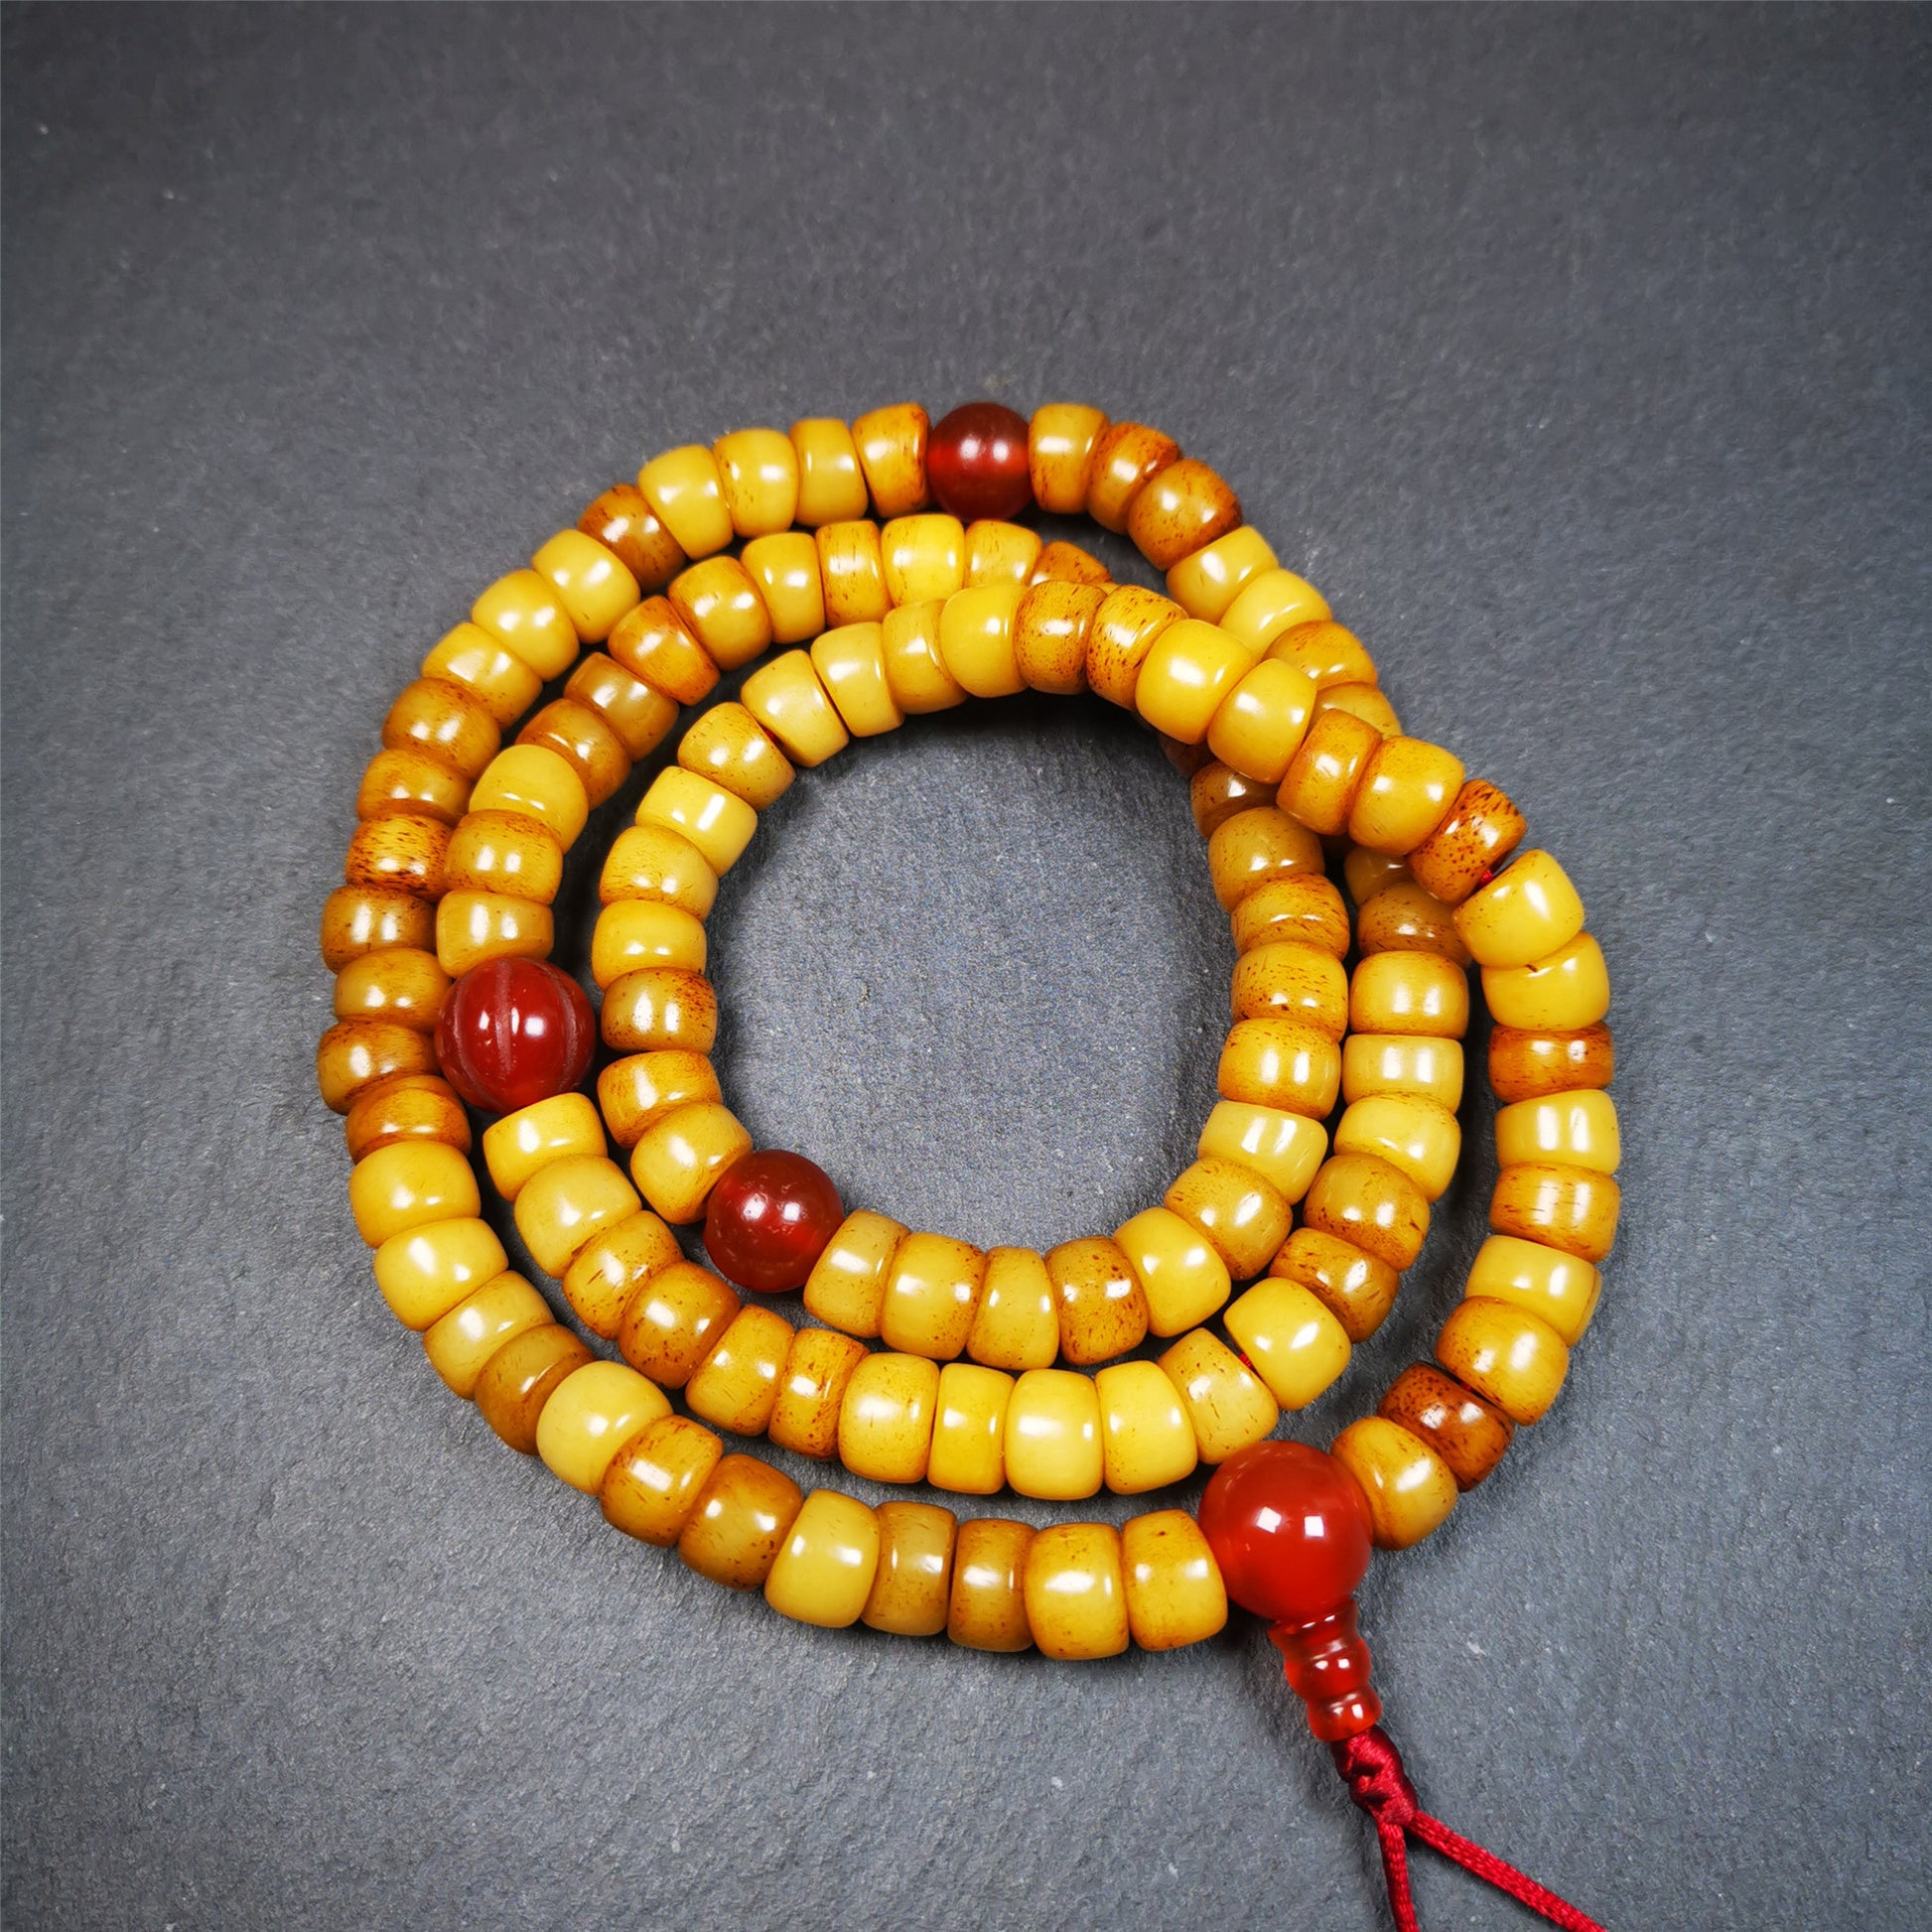 This yak bone mala was handmade from tibetan crafts man in Baiyu County,about 30 years old. It's composed of 108 pcs bevel cut 9mm bone beads,with agate beads,guru bead.